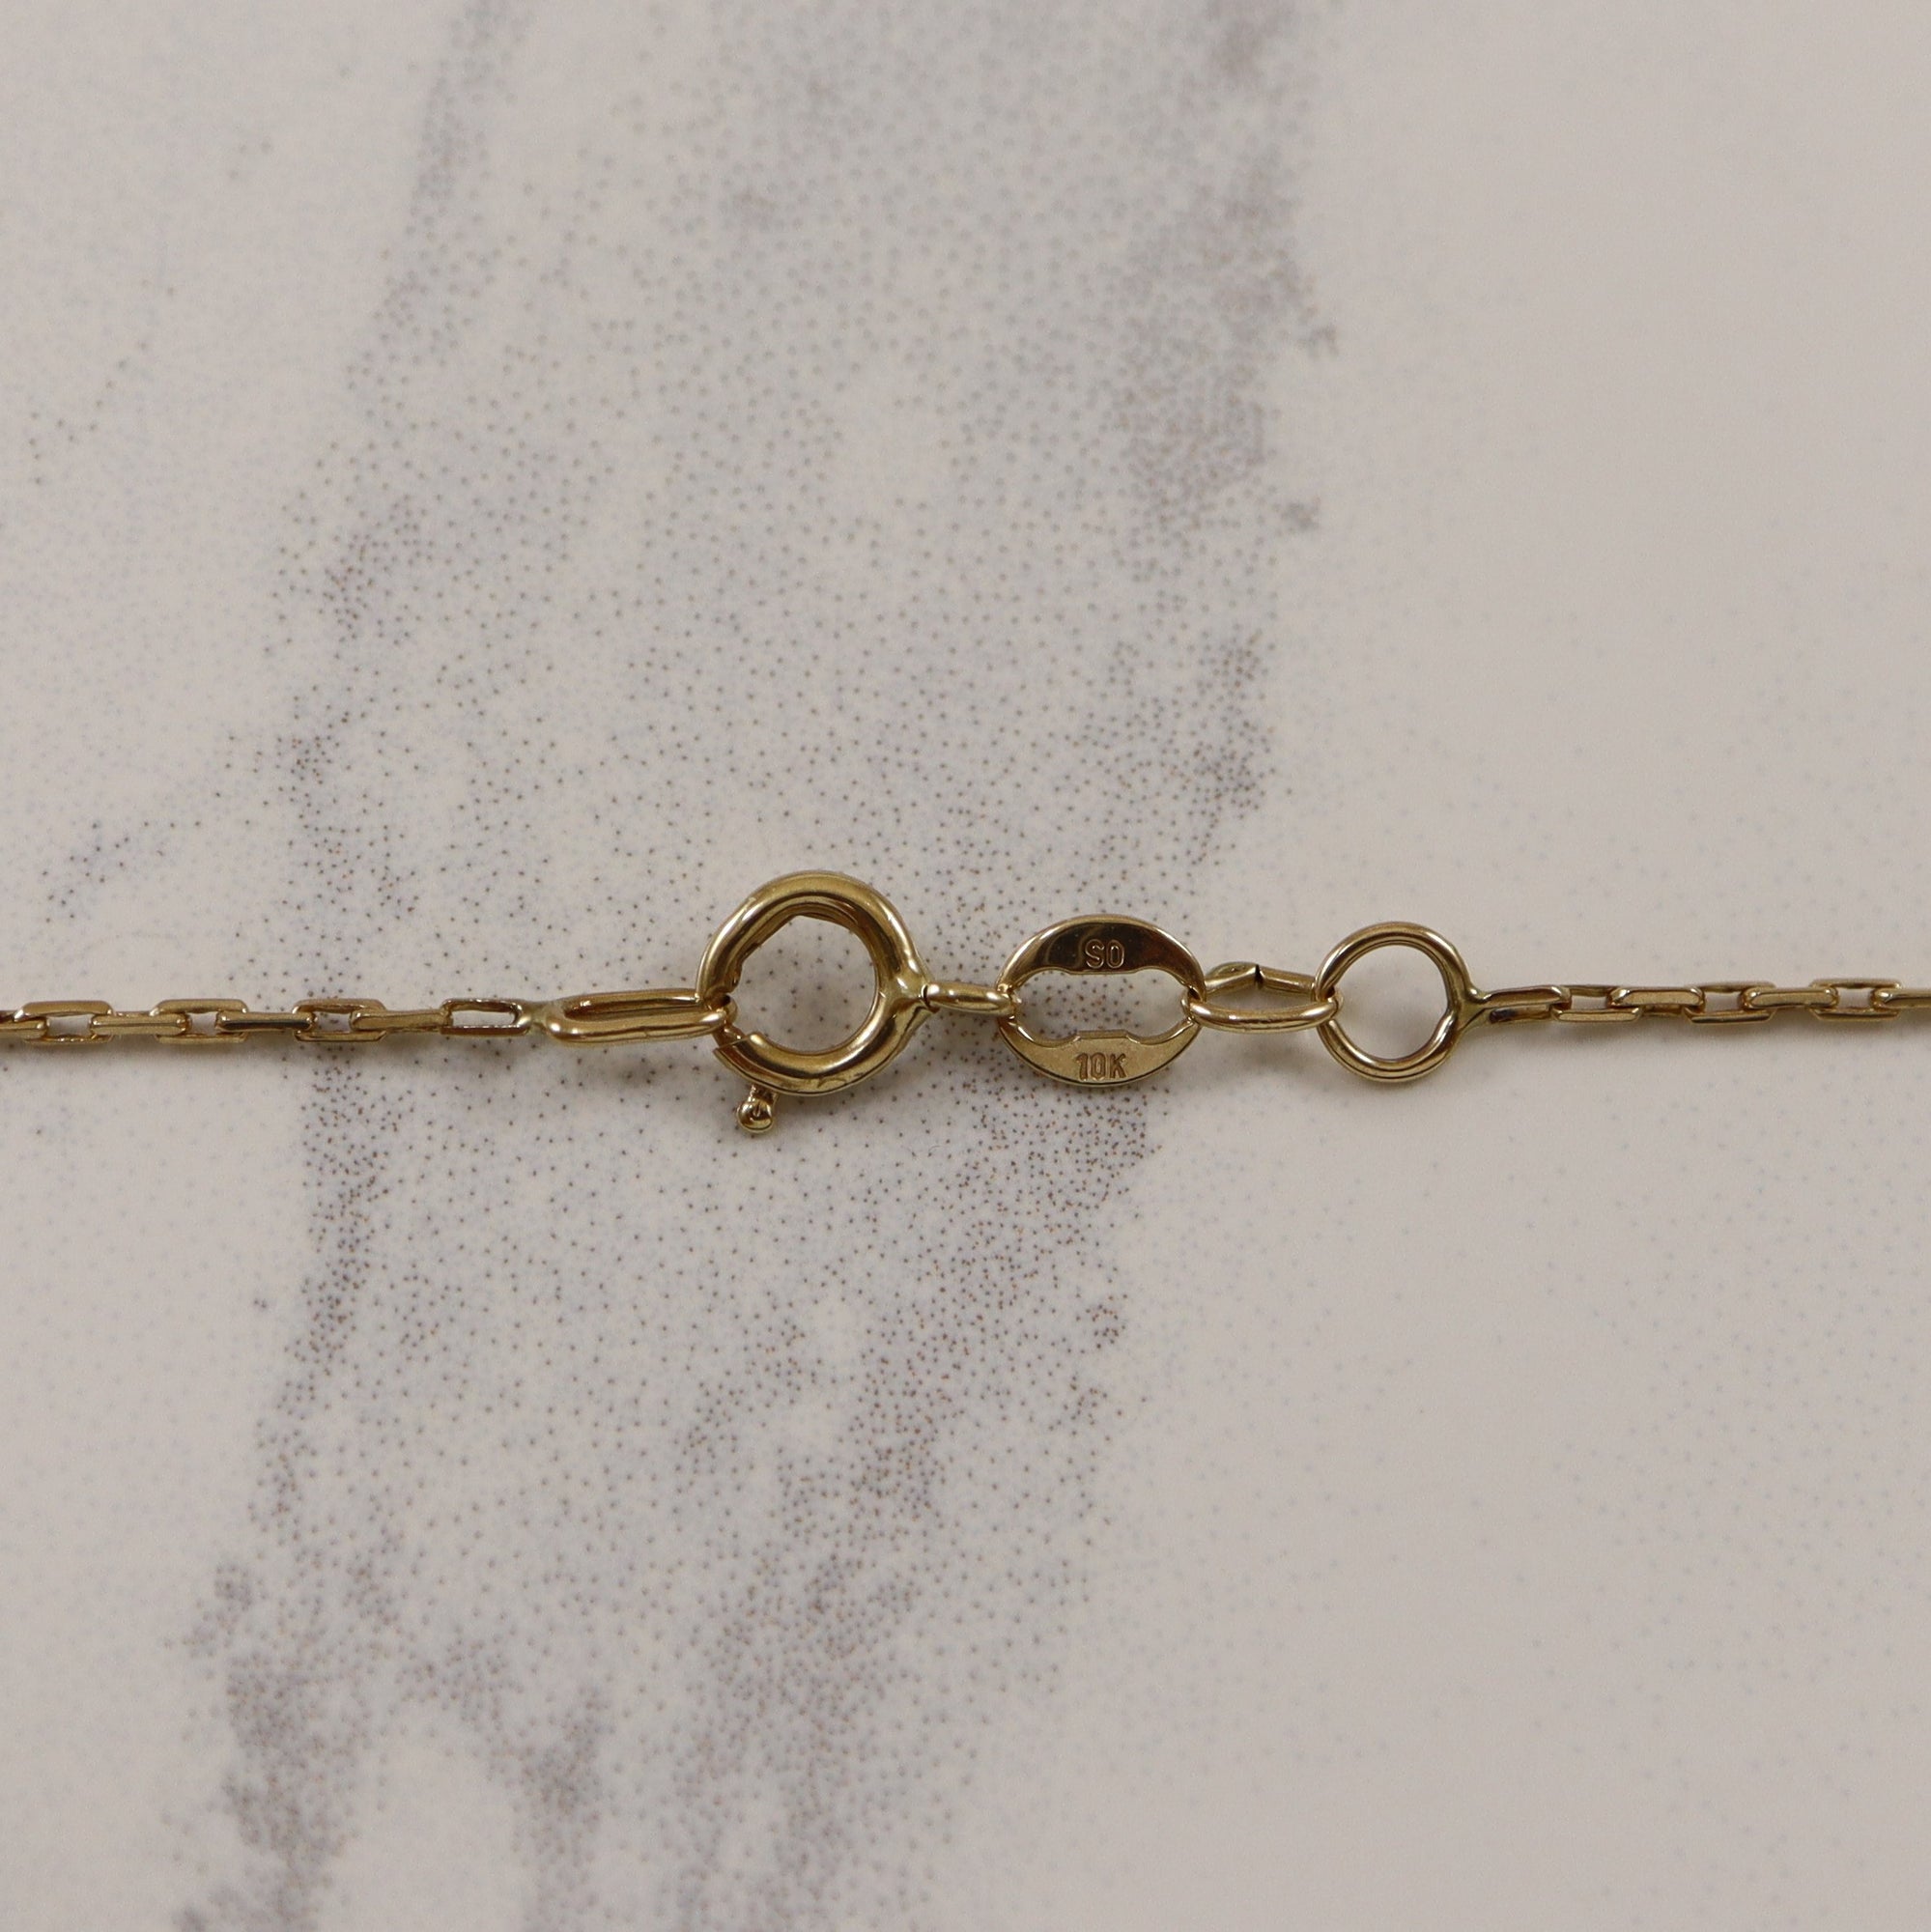 10k Yellow Gold Elongated Cable Chain | 32